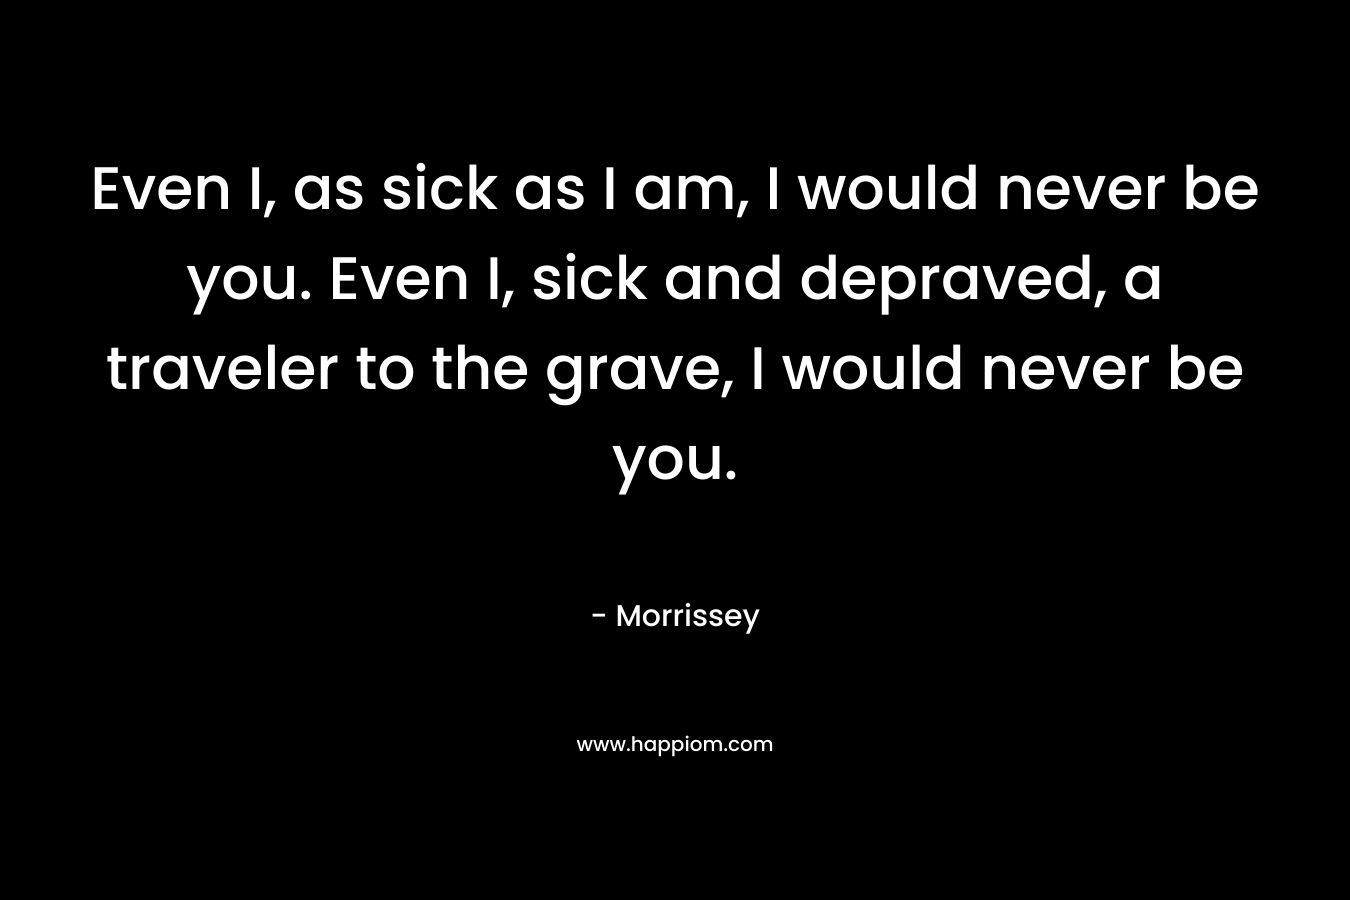 Even I, as sick as I am, I would never be you. Even I, sick and depraved, a traveler to the grave, I would never be you. – Morrissey